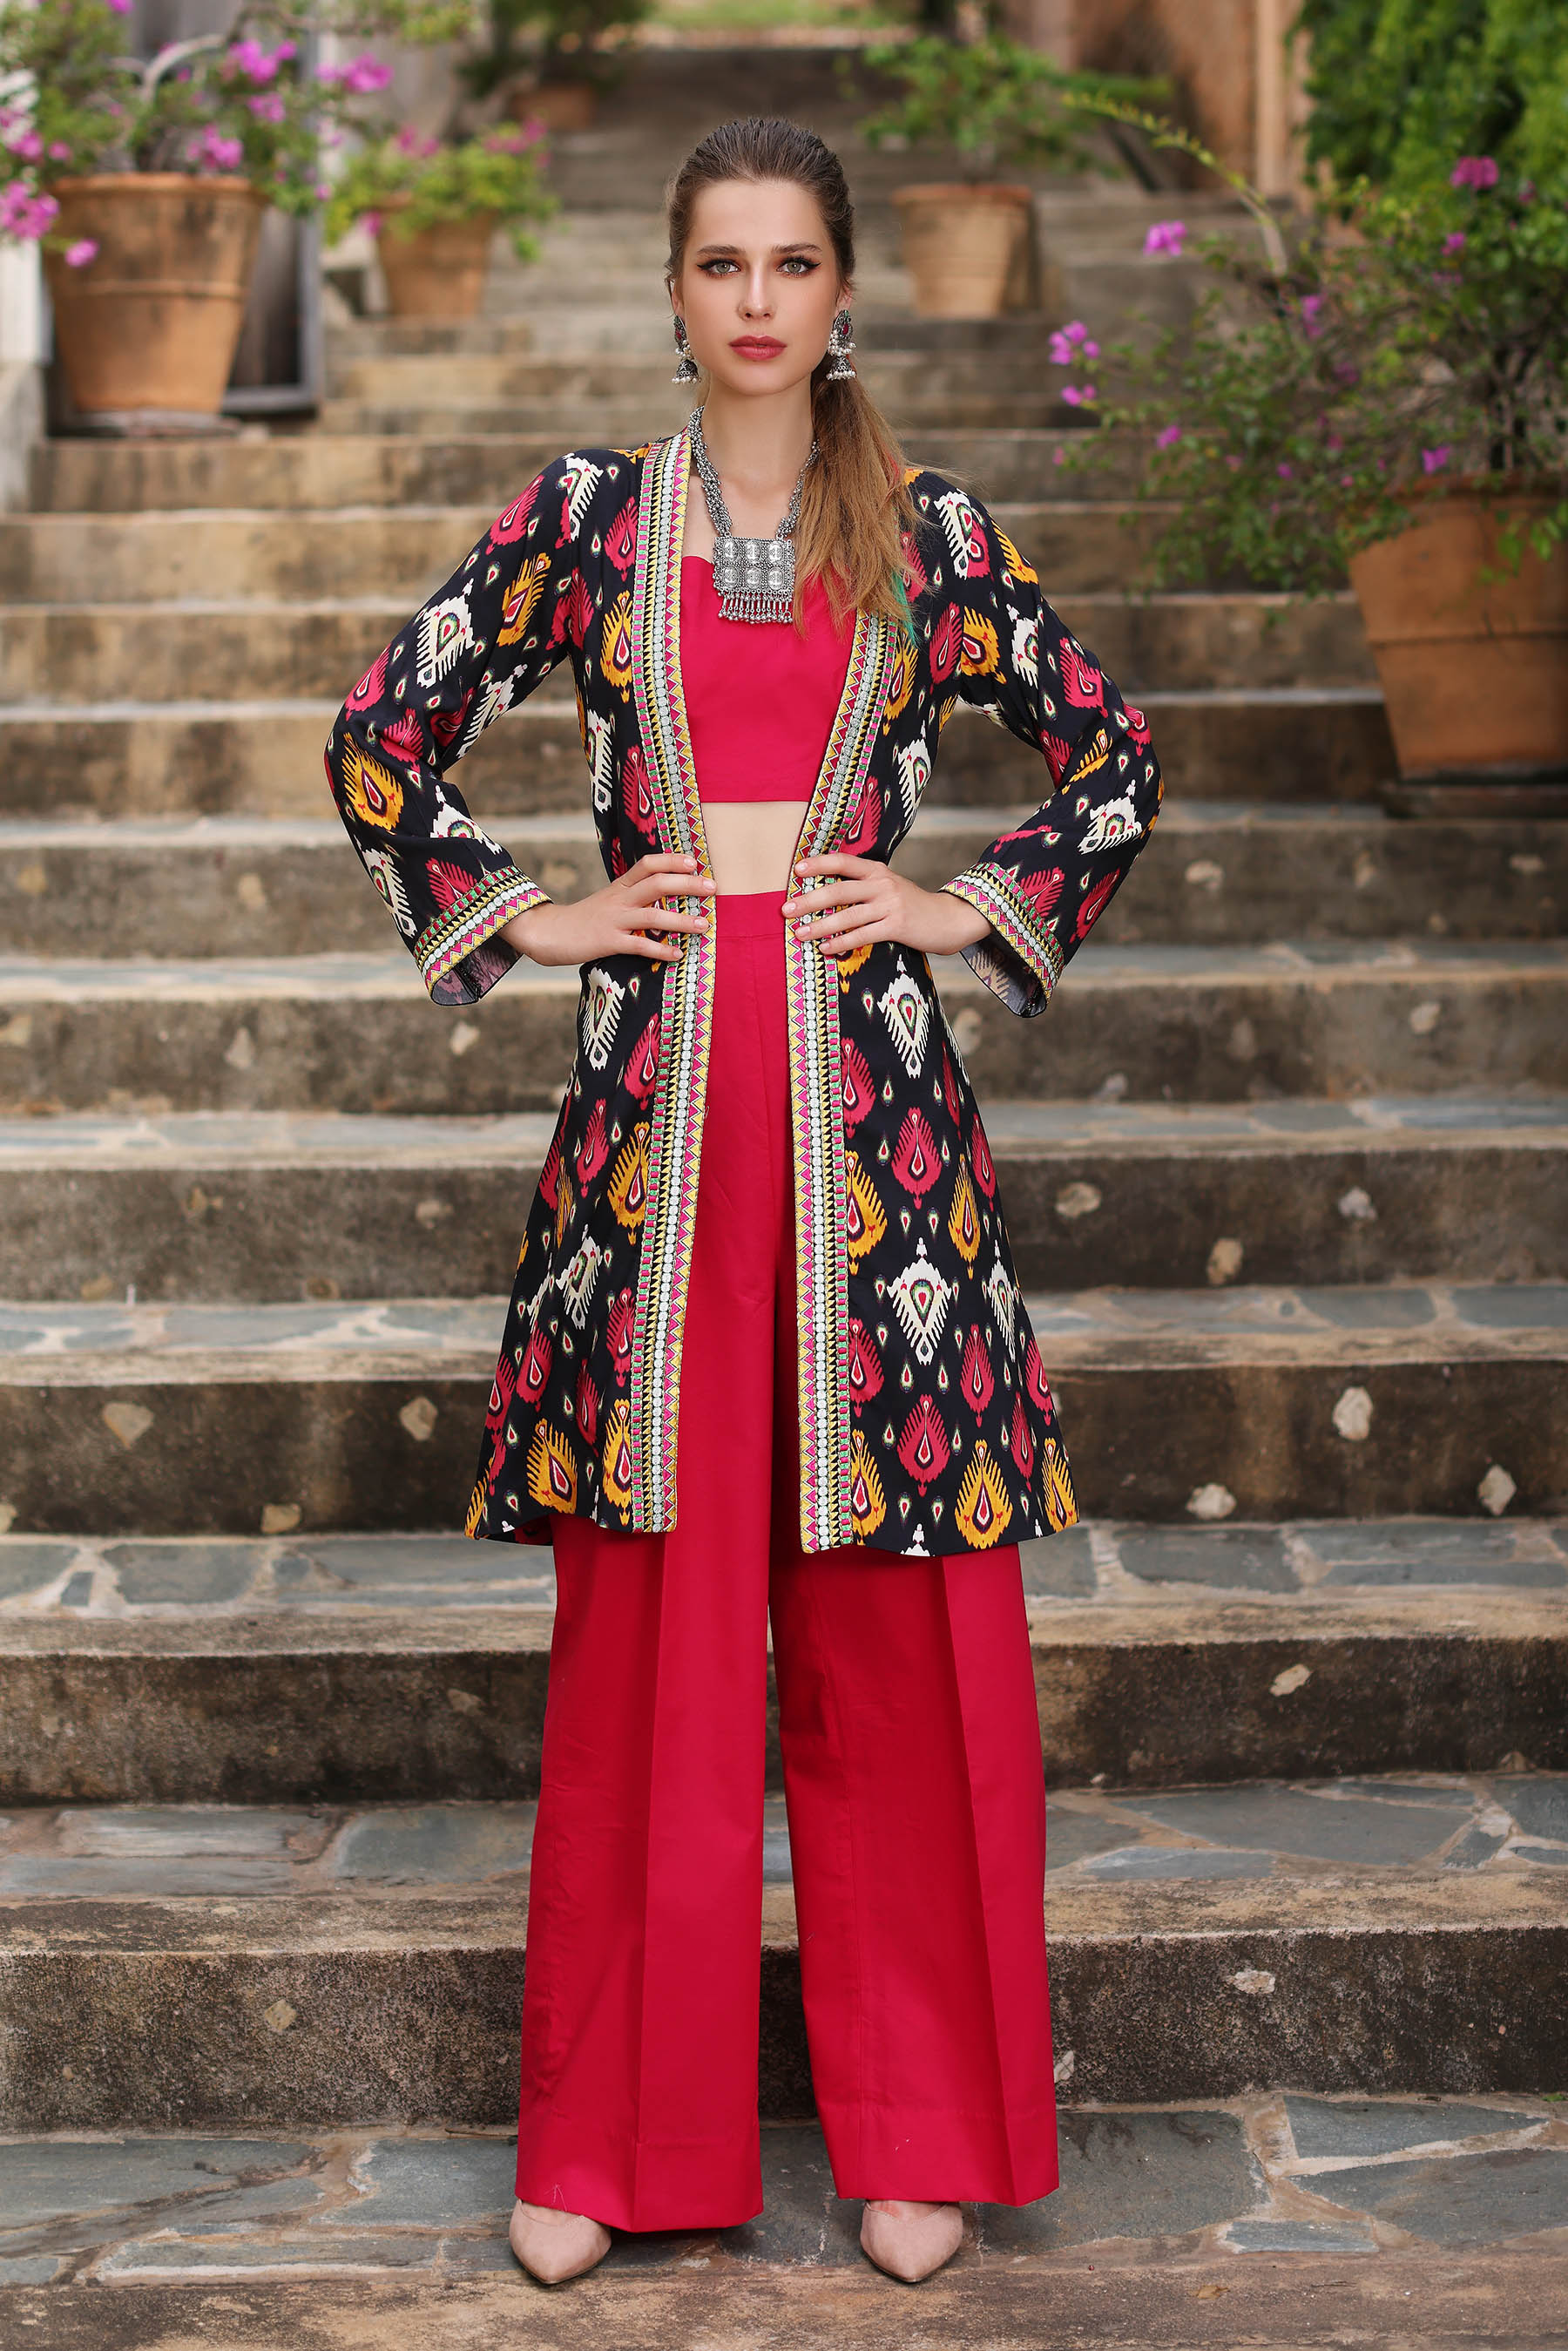 Discover Timeless Style: Ikat Print Shrug in Multi Printed Lawn ...